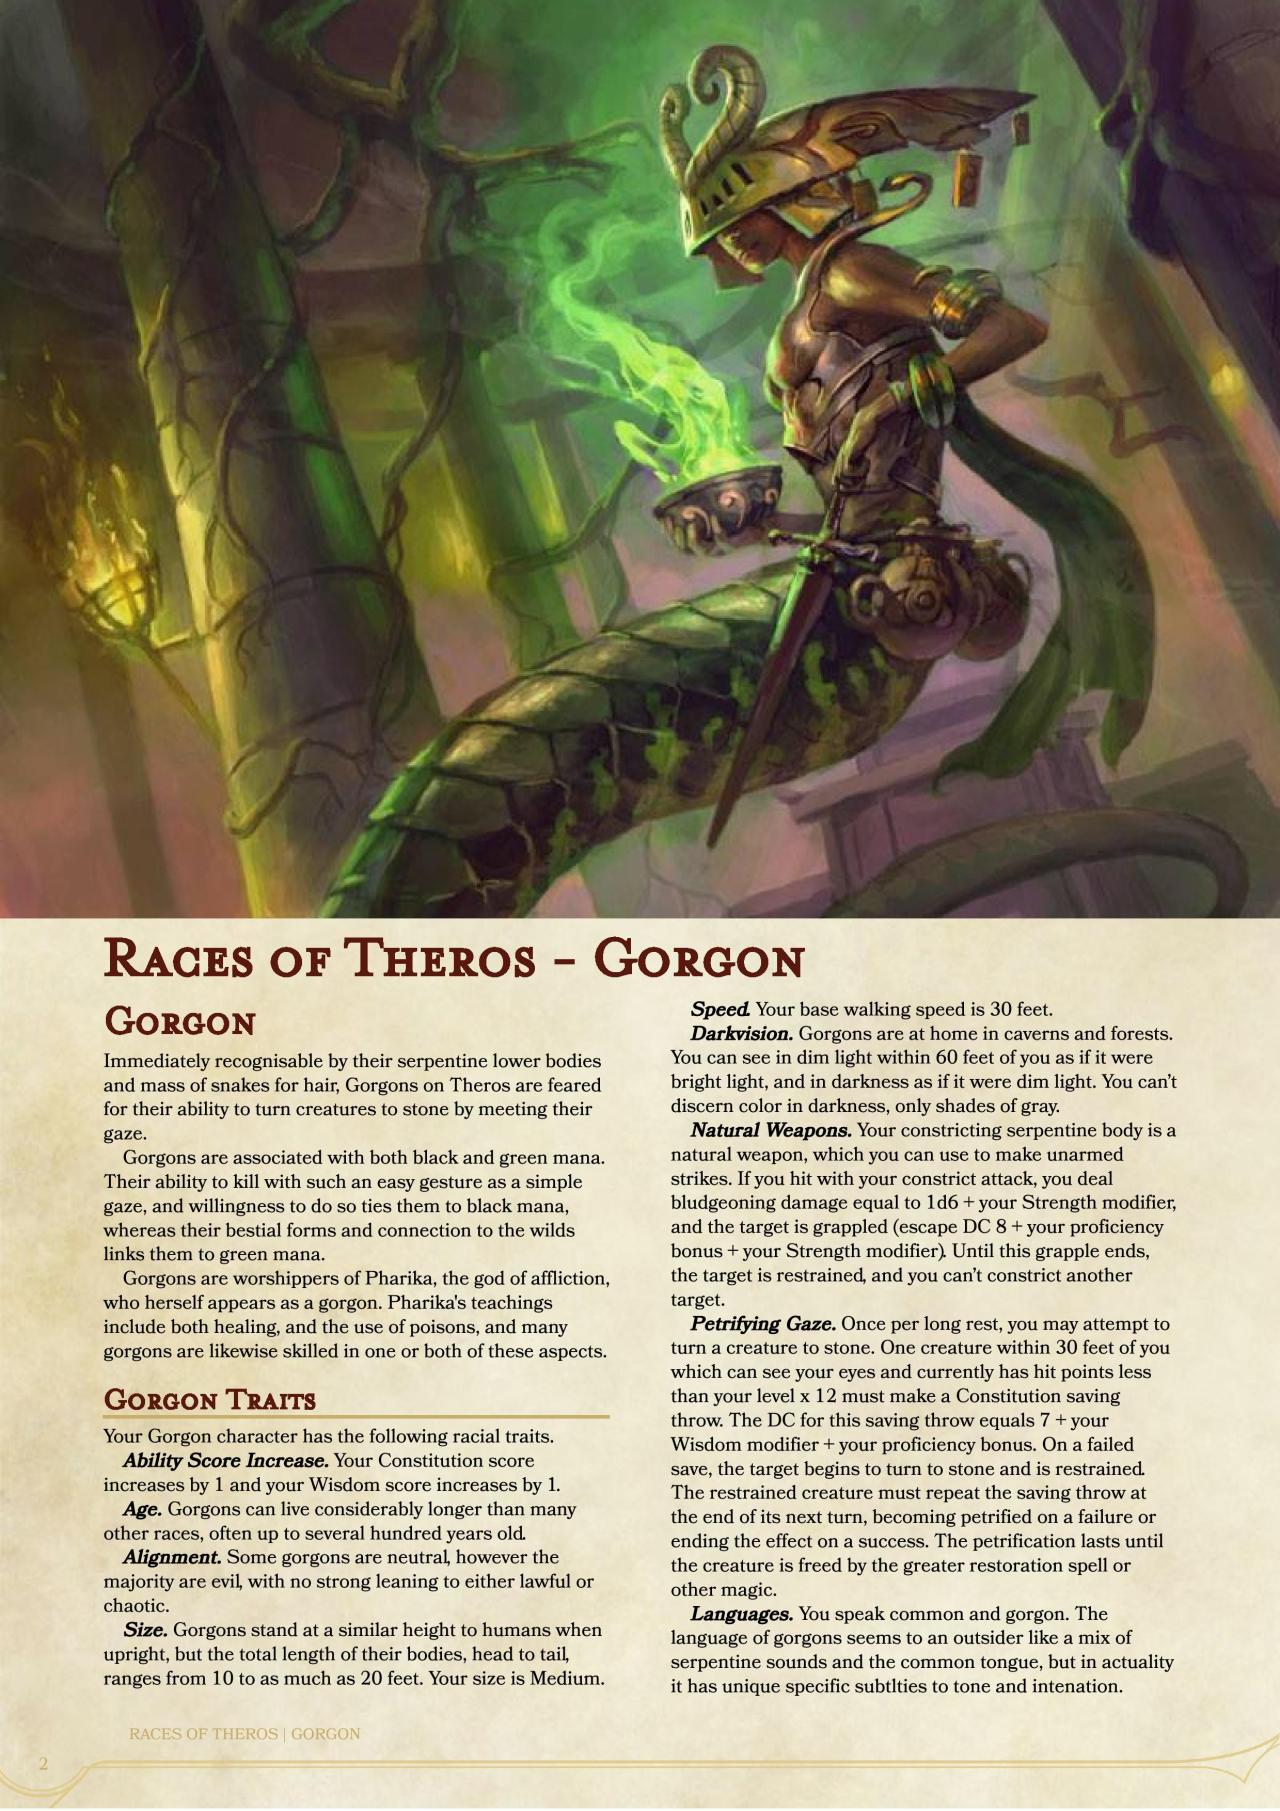 Kor Artificer D&D Homebrew — Races of Theros - Satyr and Gorgon